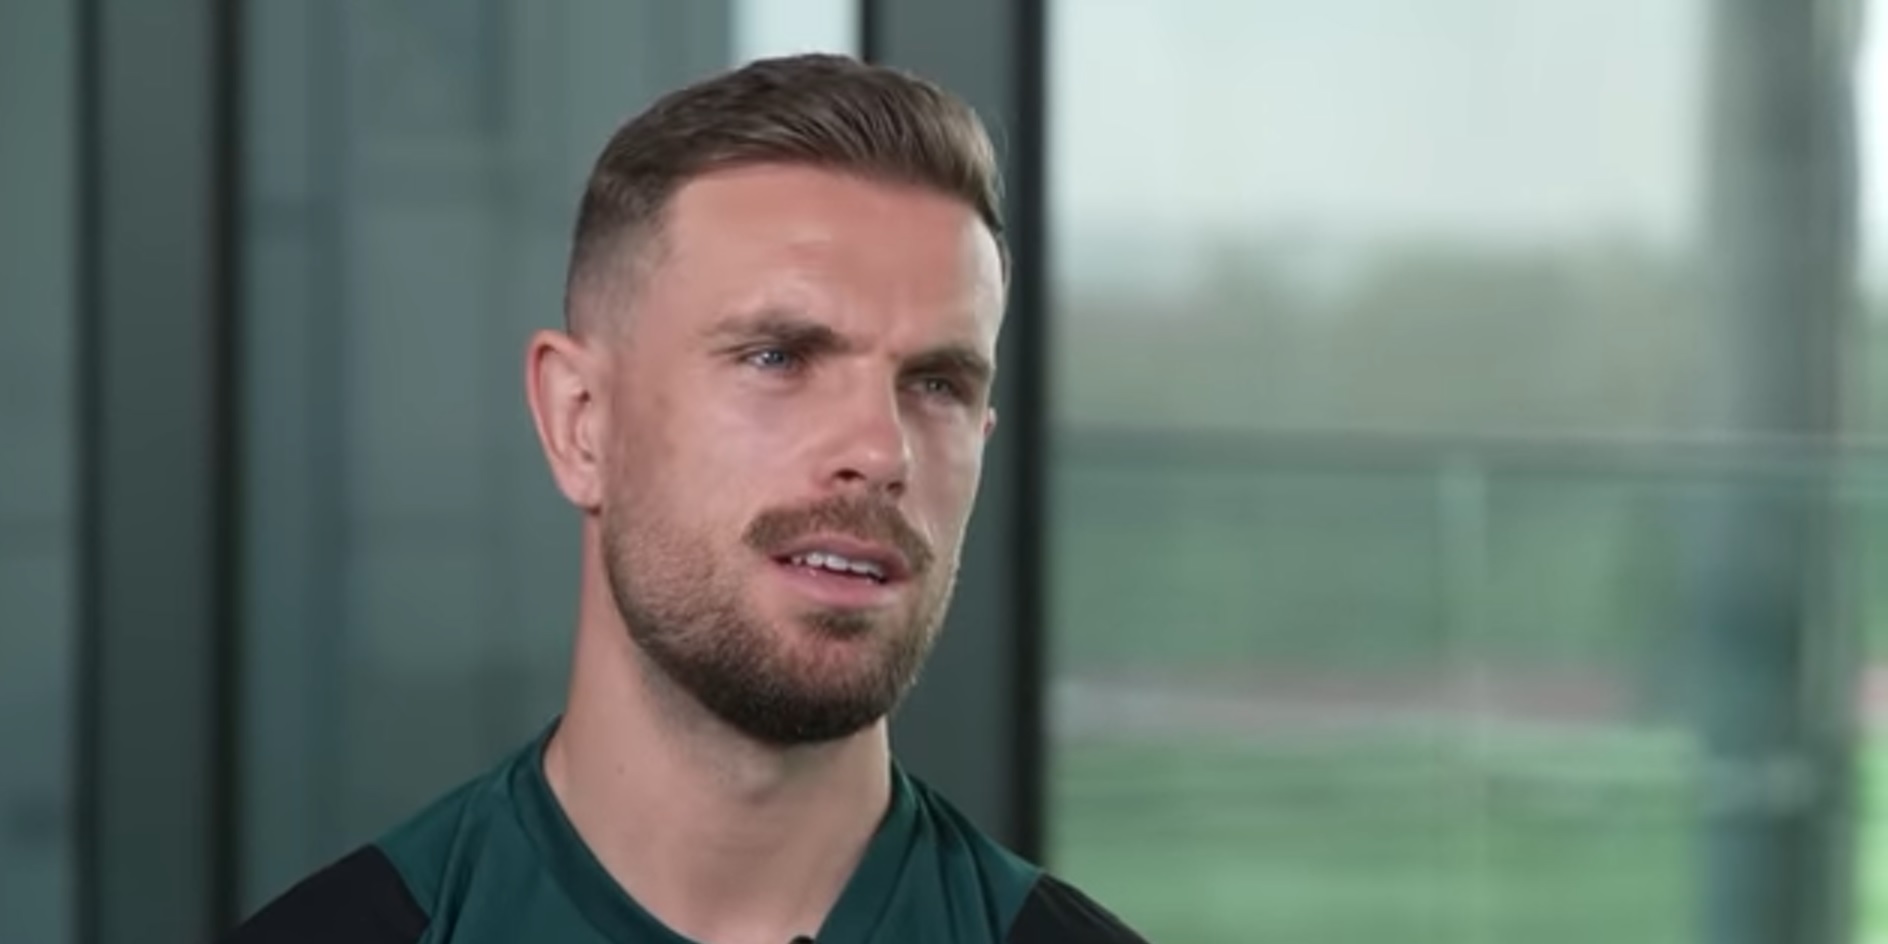 (Video) Henderson reveals one thing he’ll appreciate more from Liverpool days after retiring